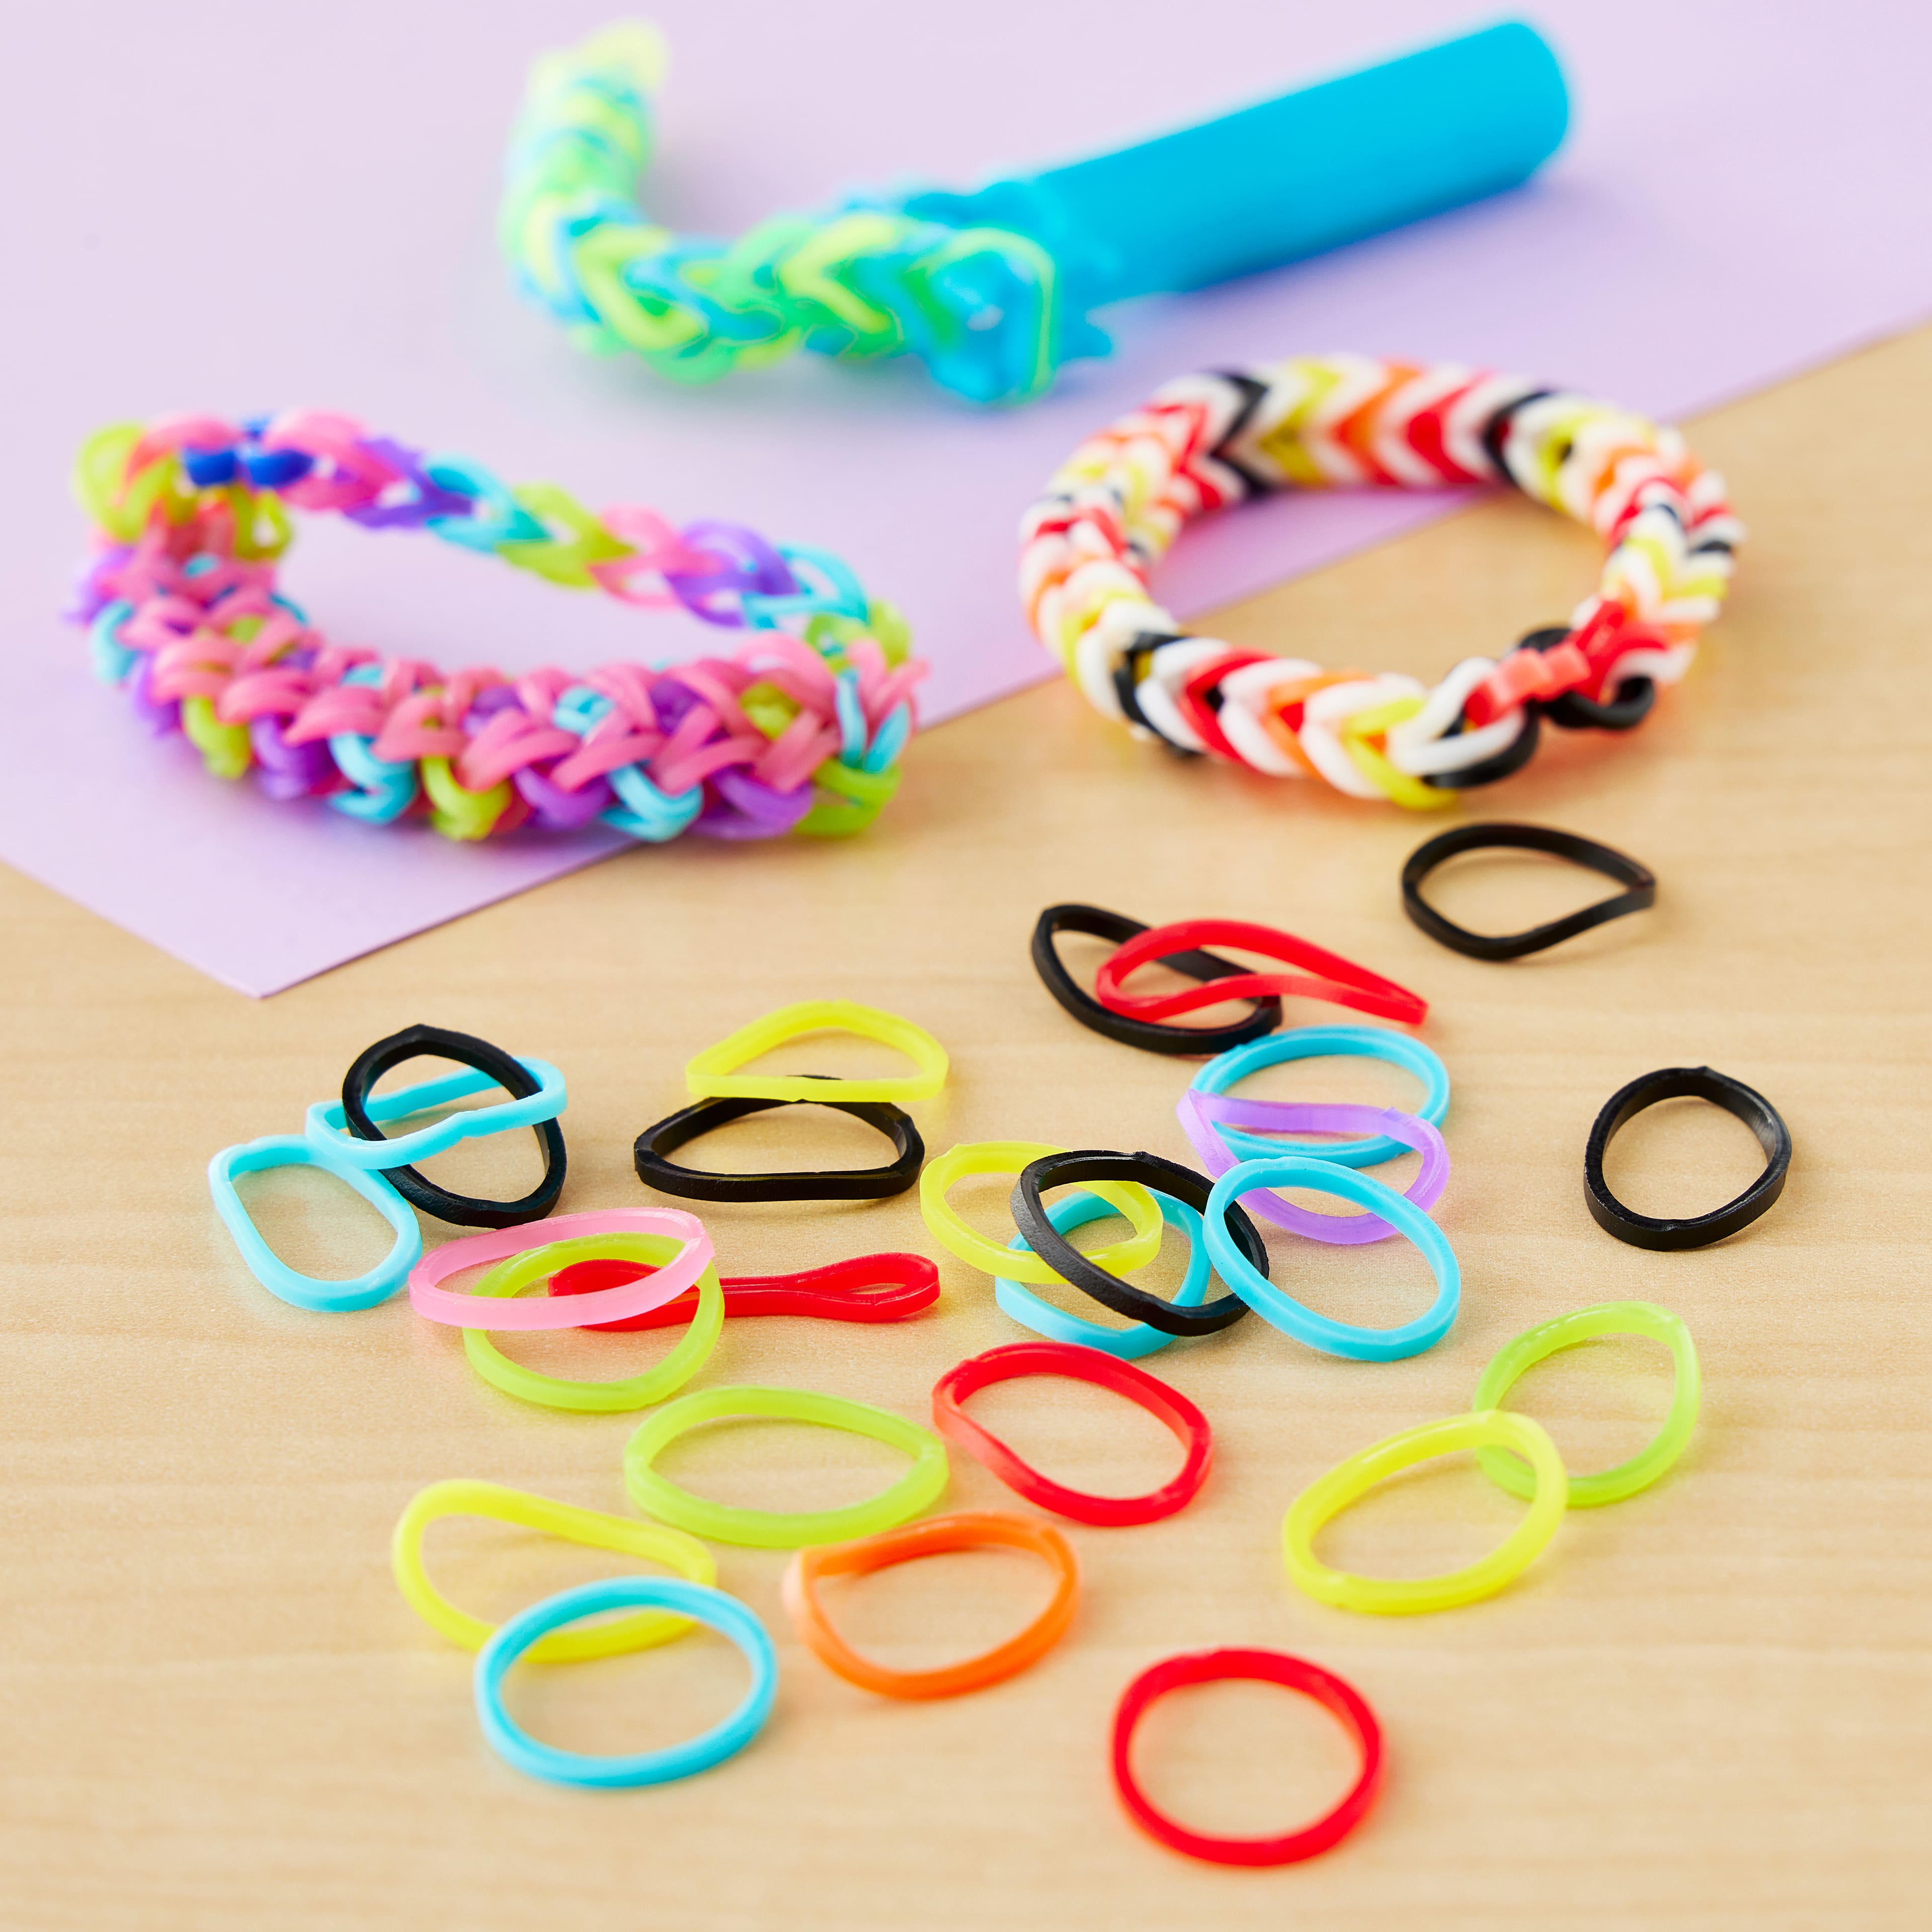 Michaels: 25% Off Entire Purchase + Rainbow Loom Rubber Band